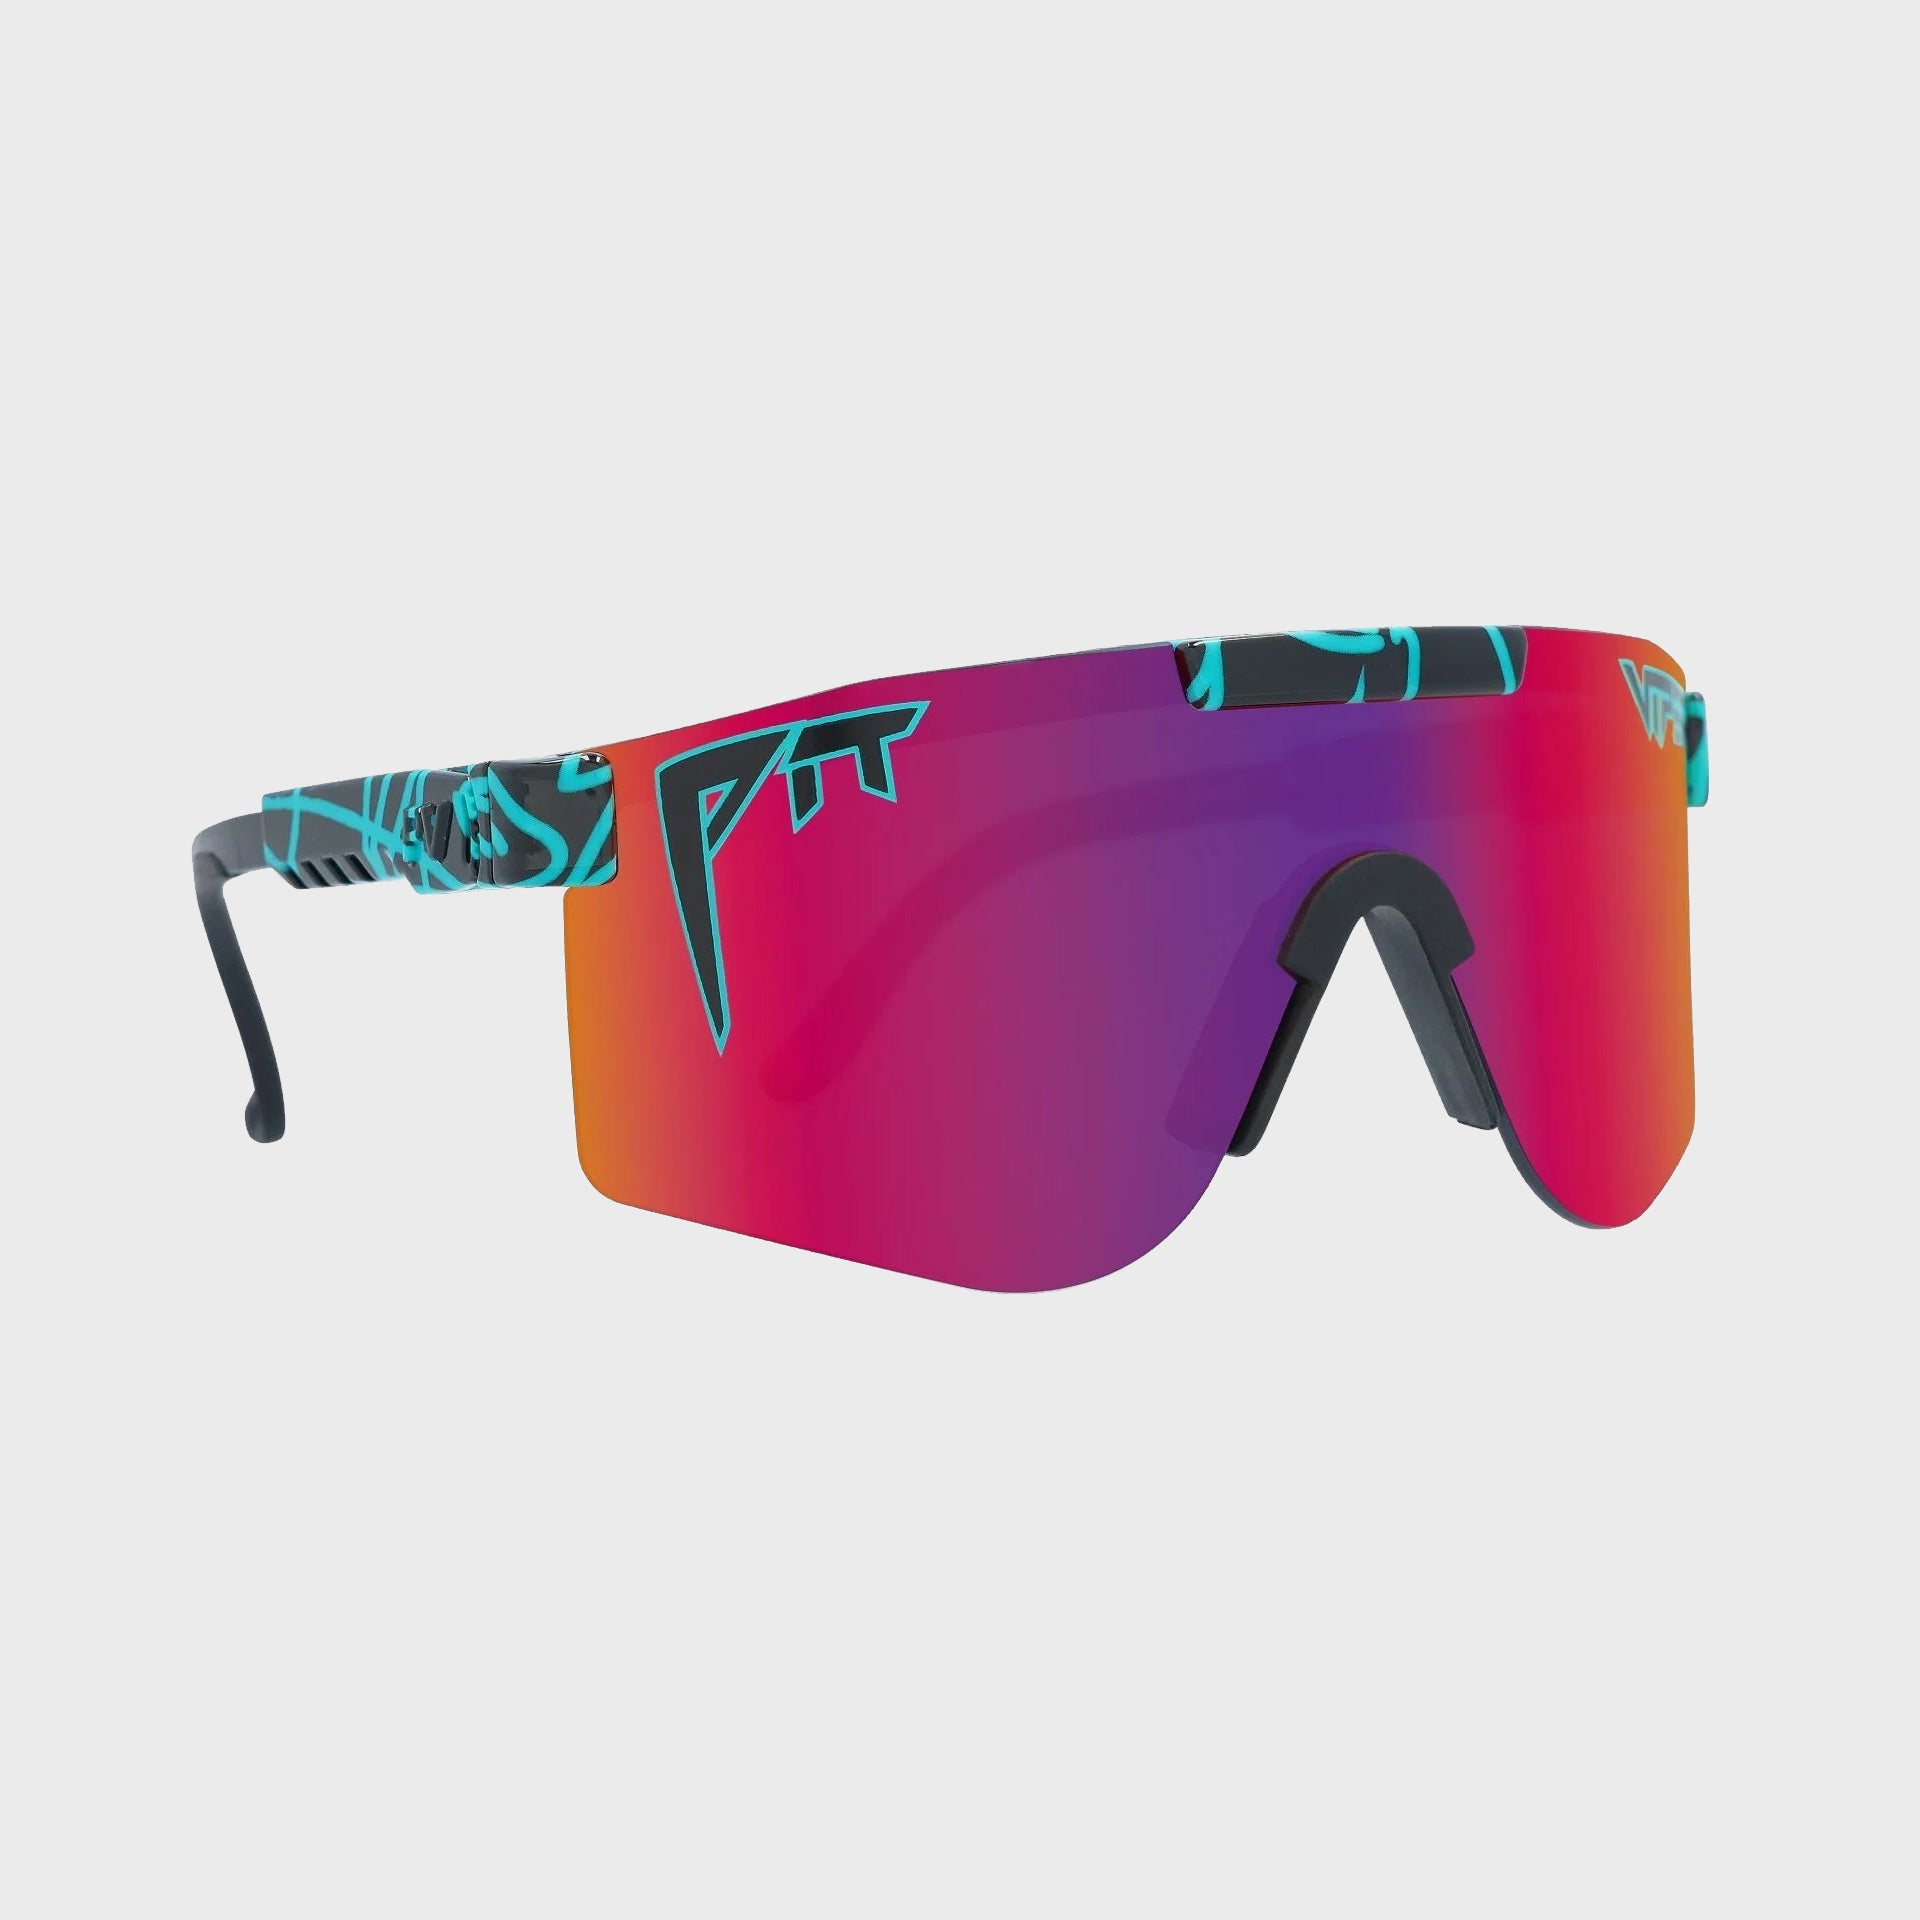 Pit Viper The Voltage Polarized Double Wide Sunglasses - ManGo Surfing